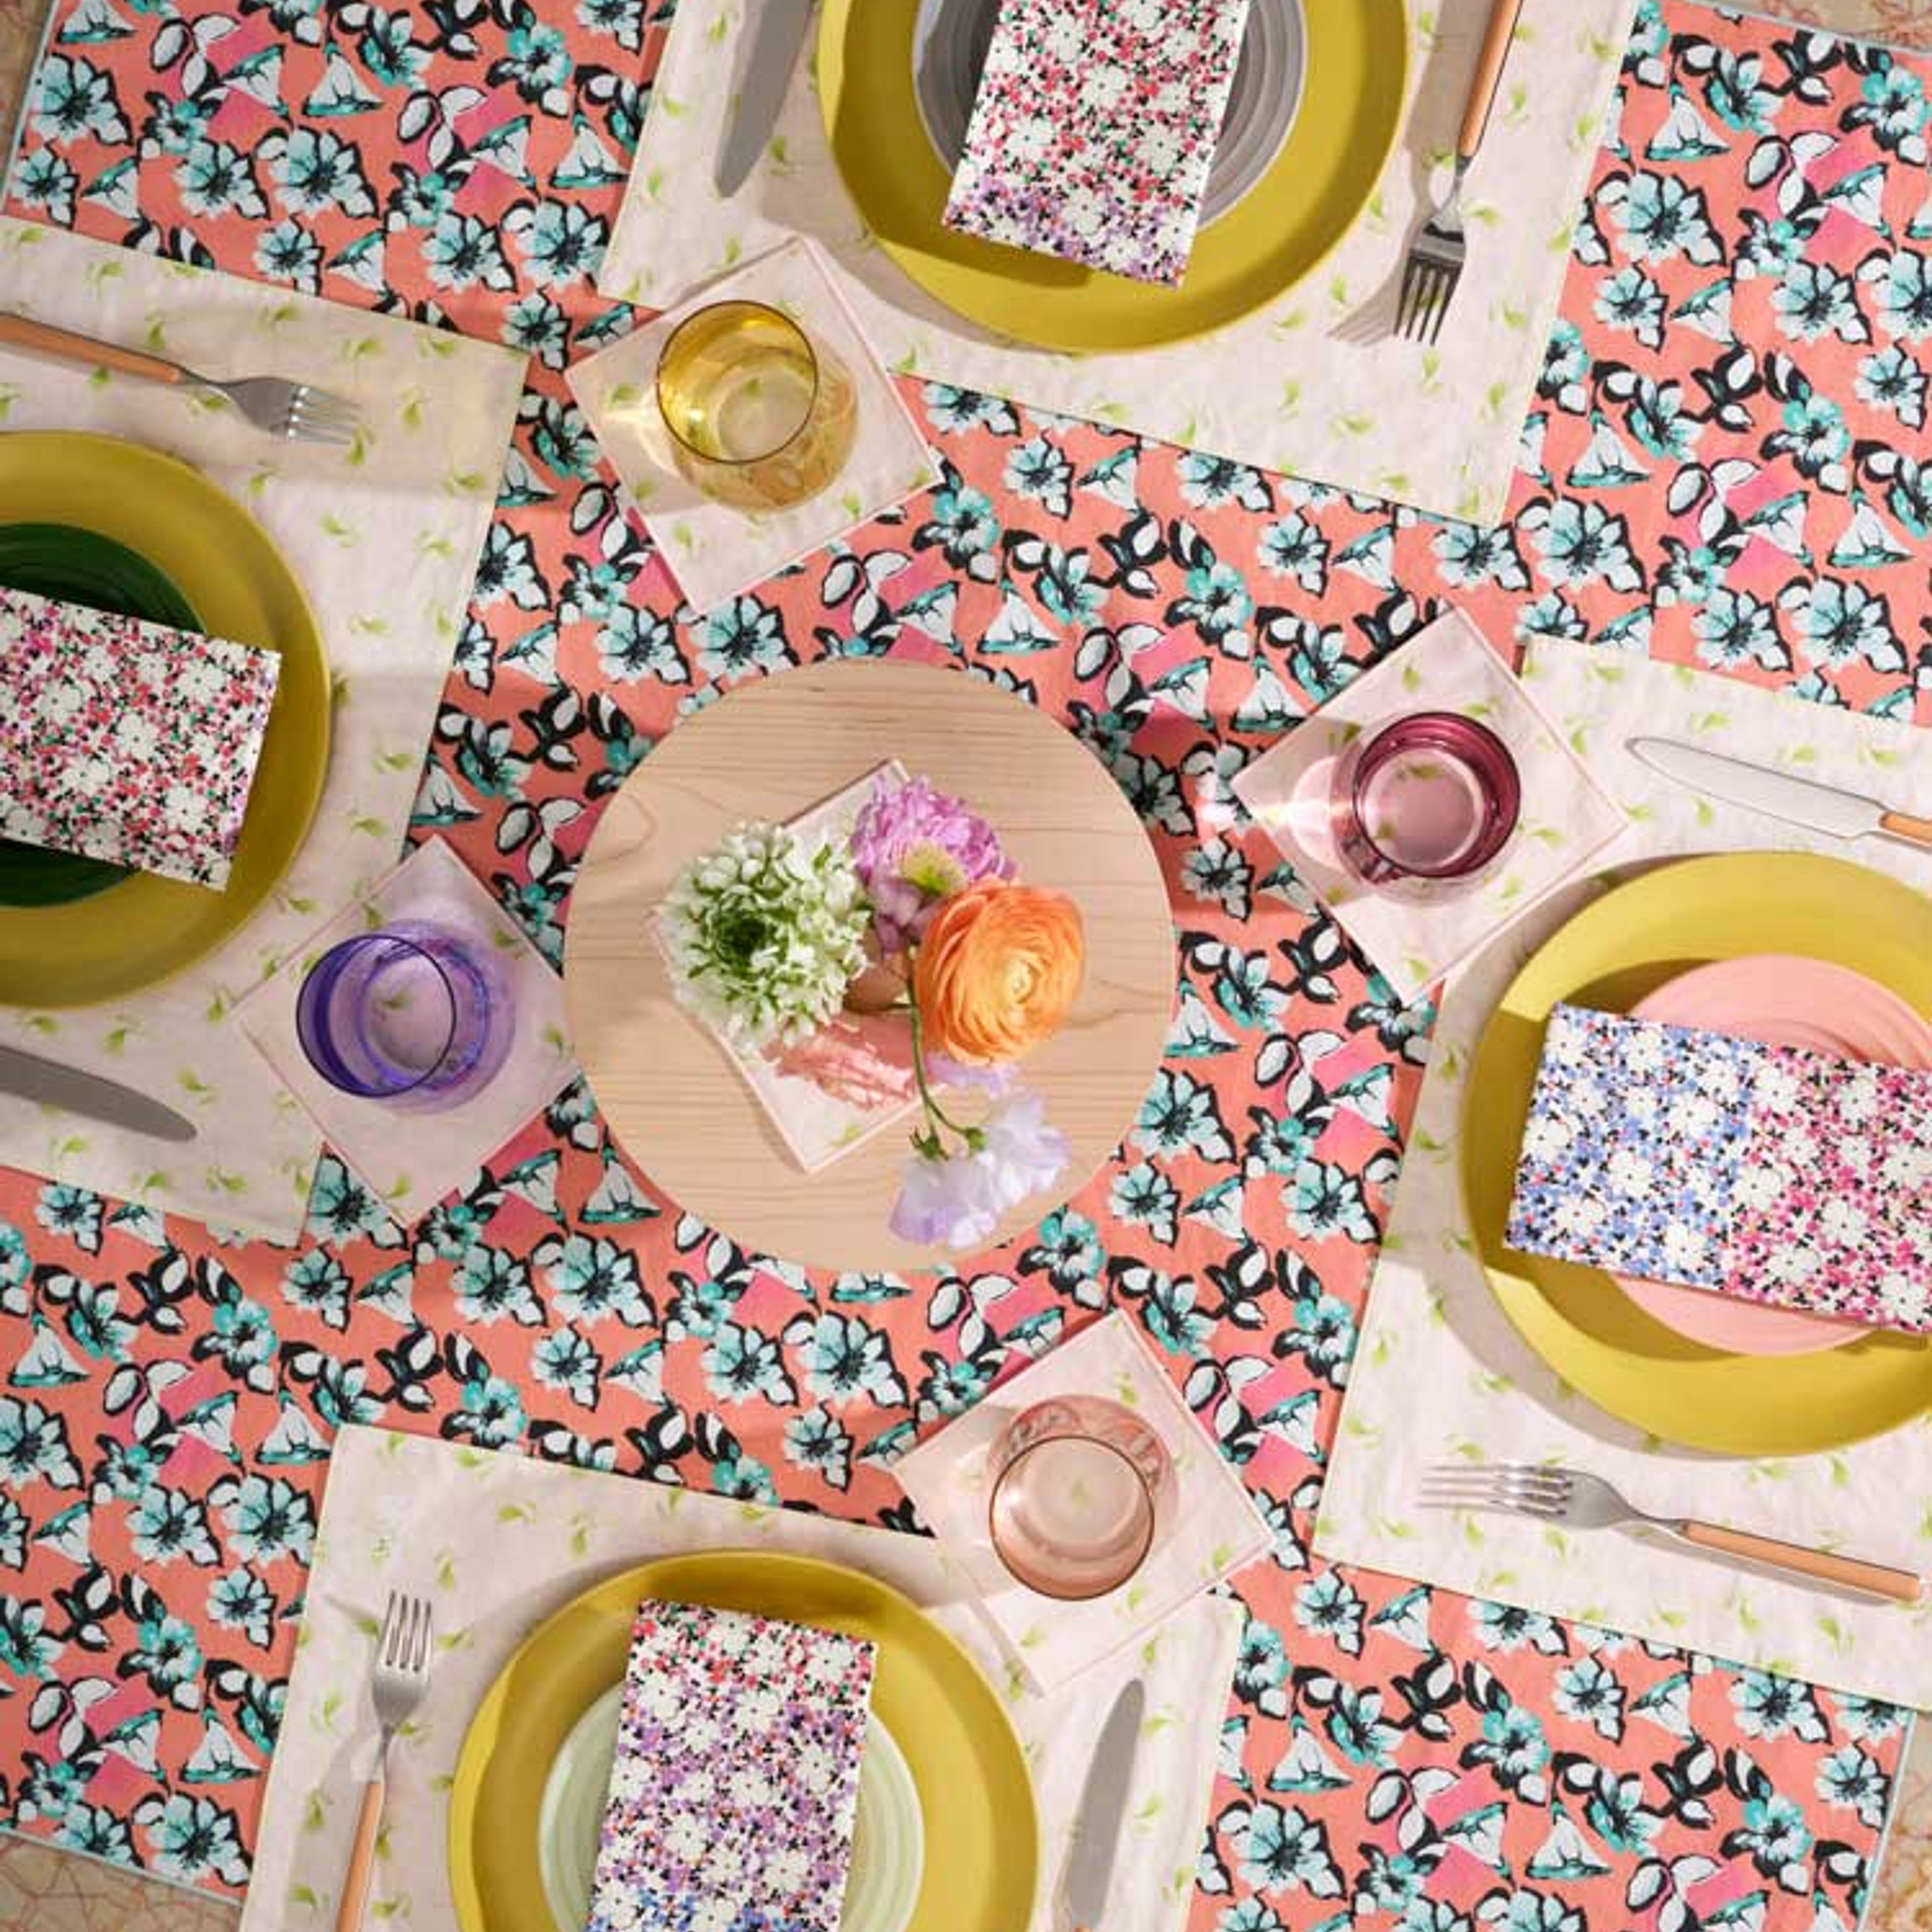 Morning Glory Centerpiece Tablecloth